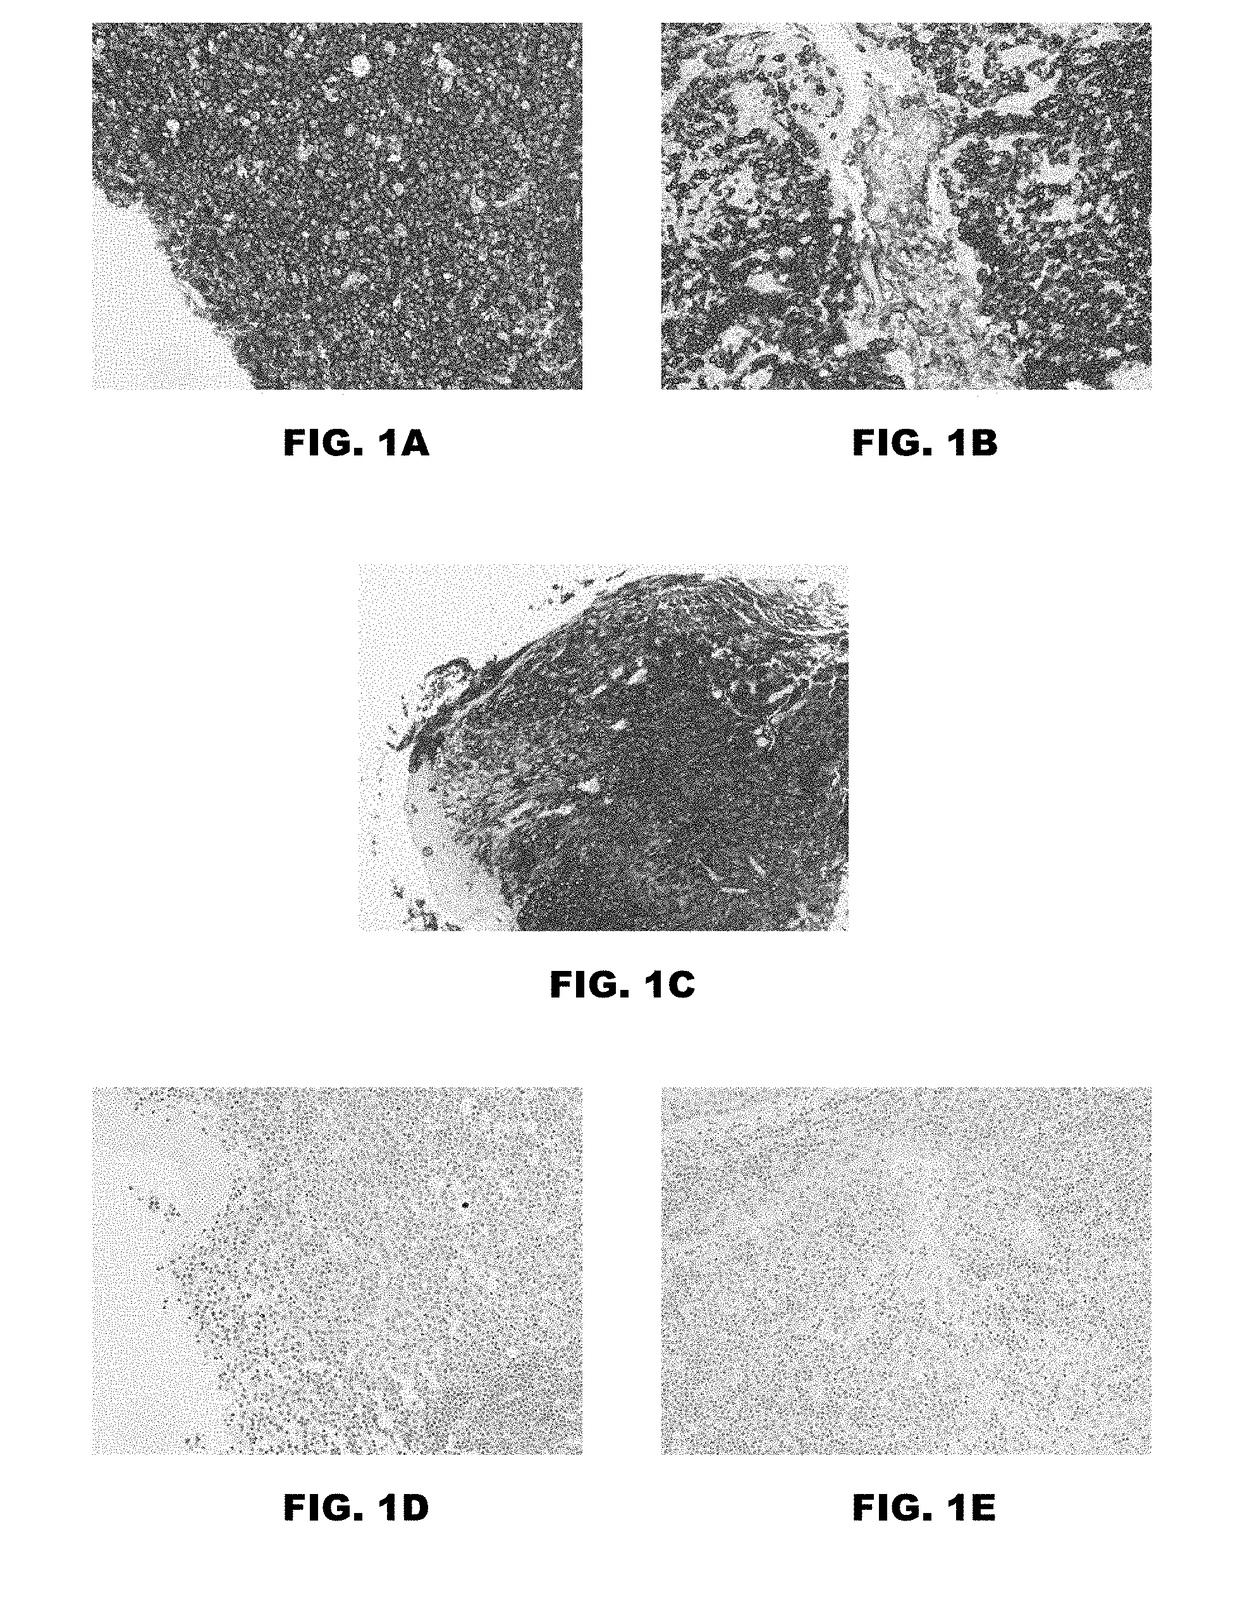 Compositions and methods for simultaneous inactivation of alkaline phosphatase and peroxidase enzymes during automated multiplex tissue staining assays